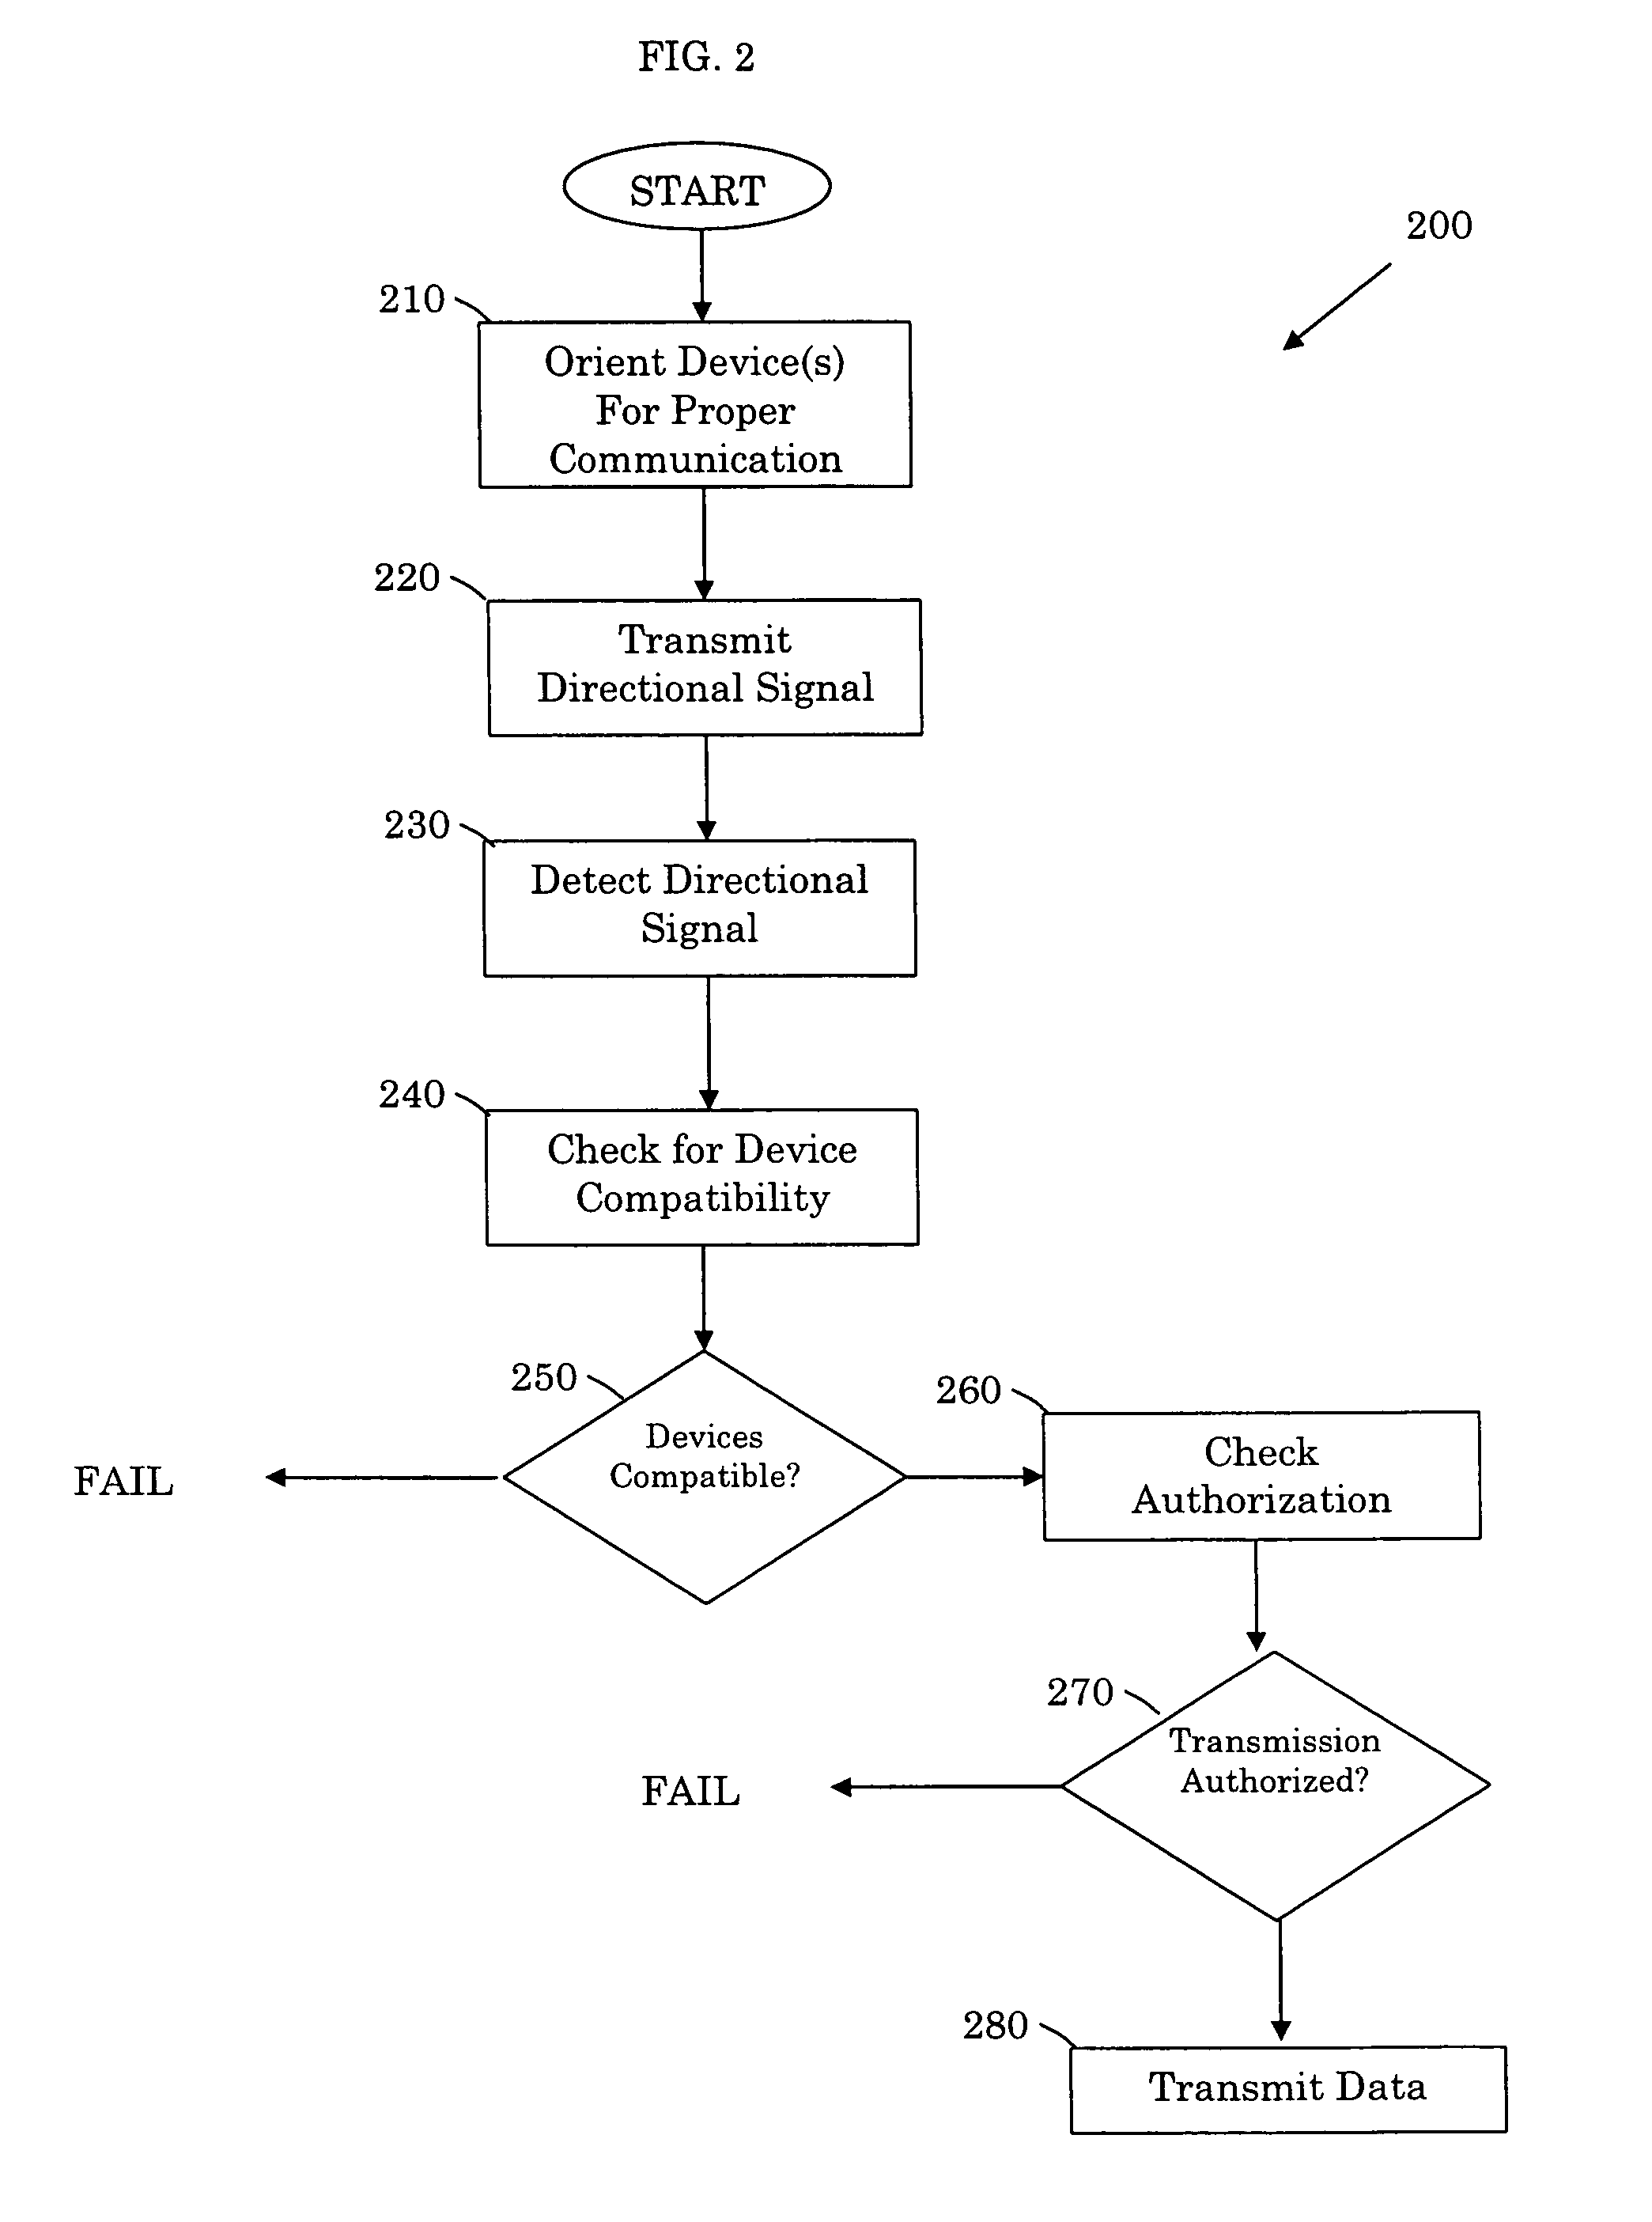 Systems and methods for communicating with multiple devices